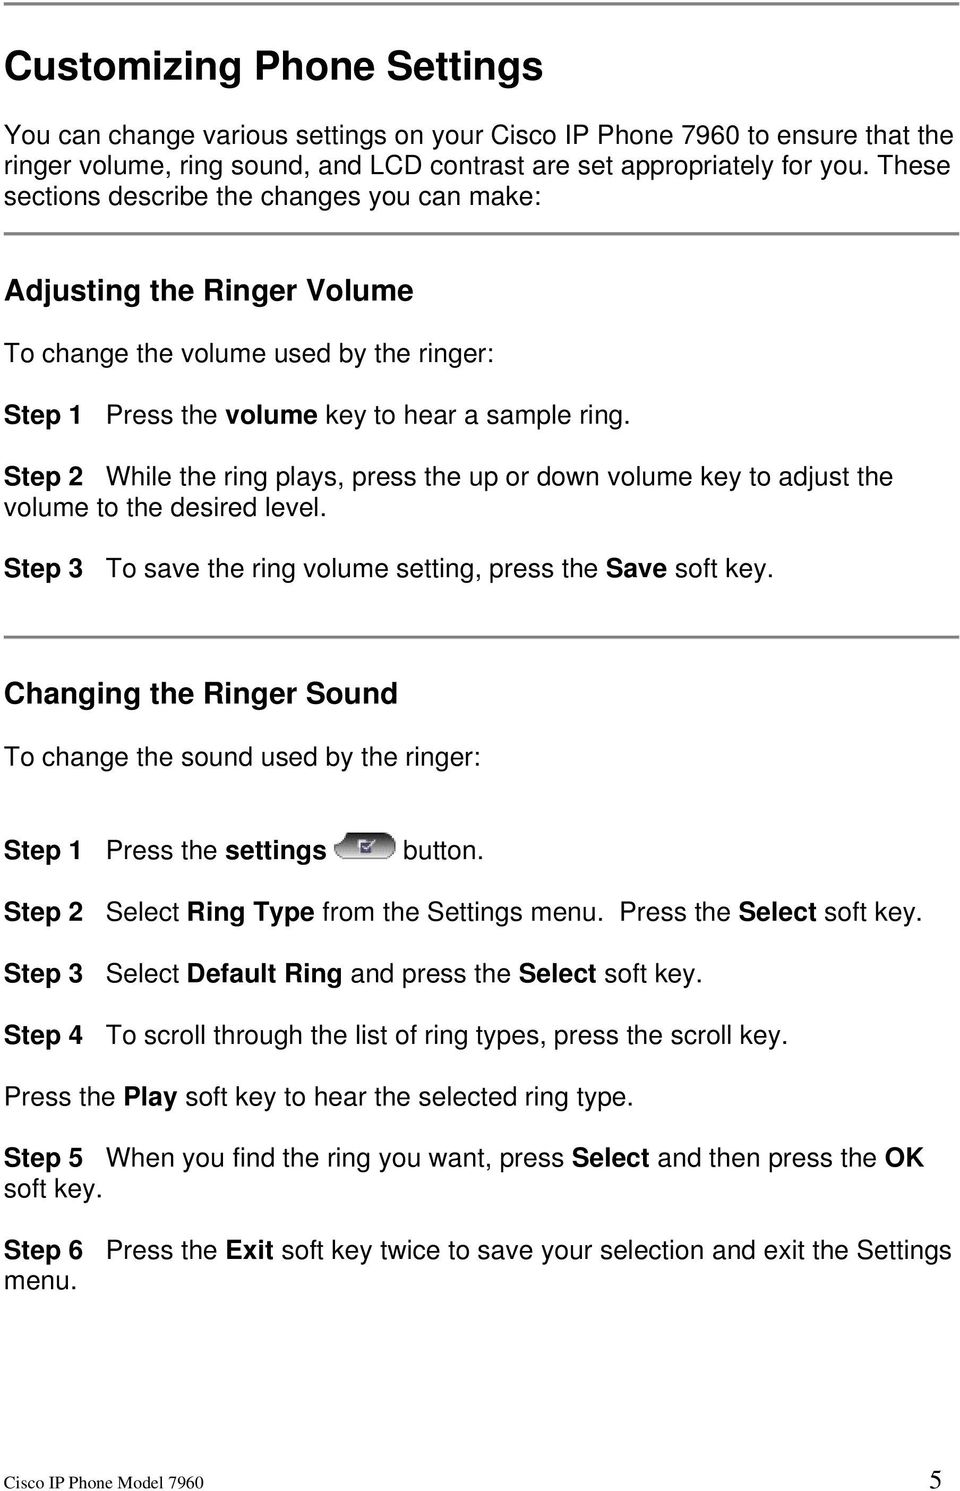 Step 2 While the ring plays, press the up or down volume key to adjust the volume to the desired level. Step 3 To save the ring volume setting, press the Save soft key.